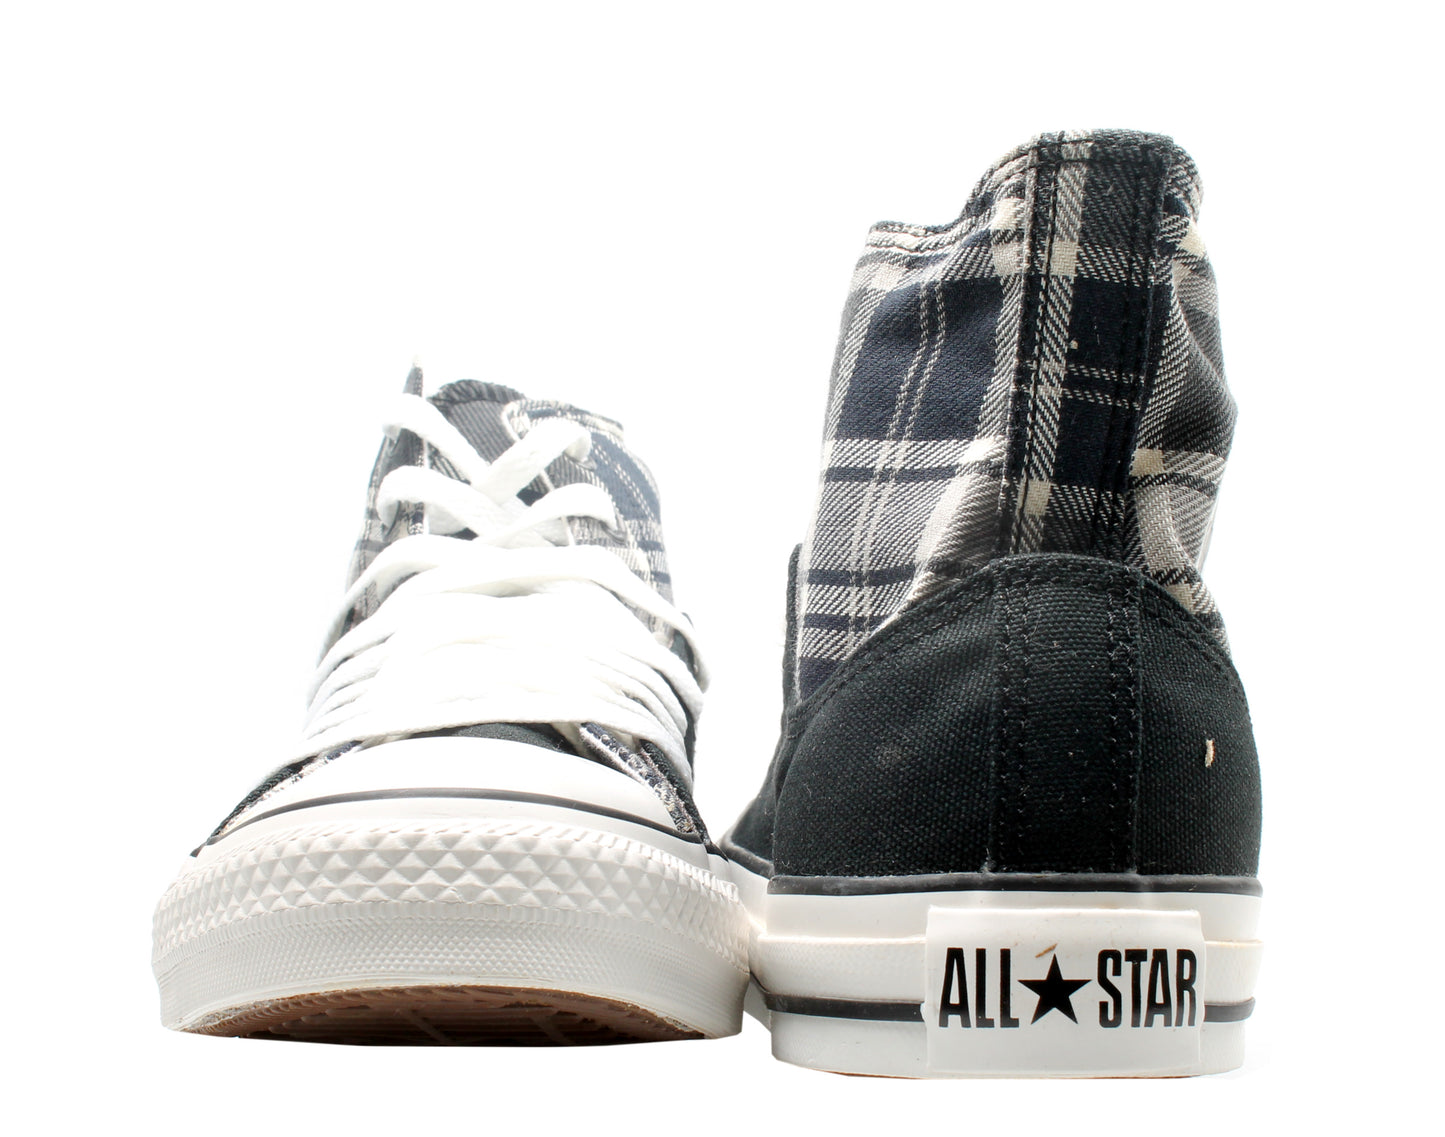 Converse Chuck Taylor All Star Layer Up Plaid Black/Grey High Top Sneakers 111159